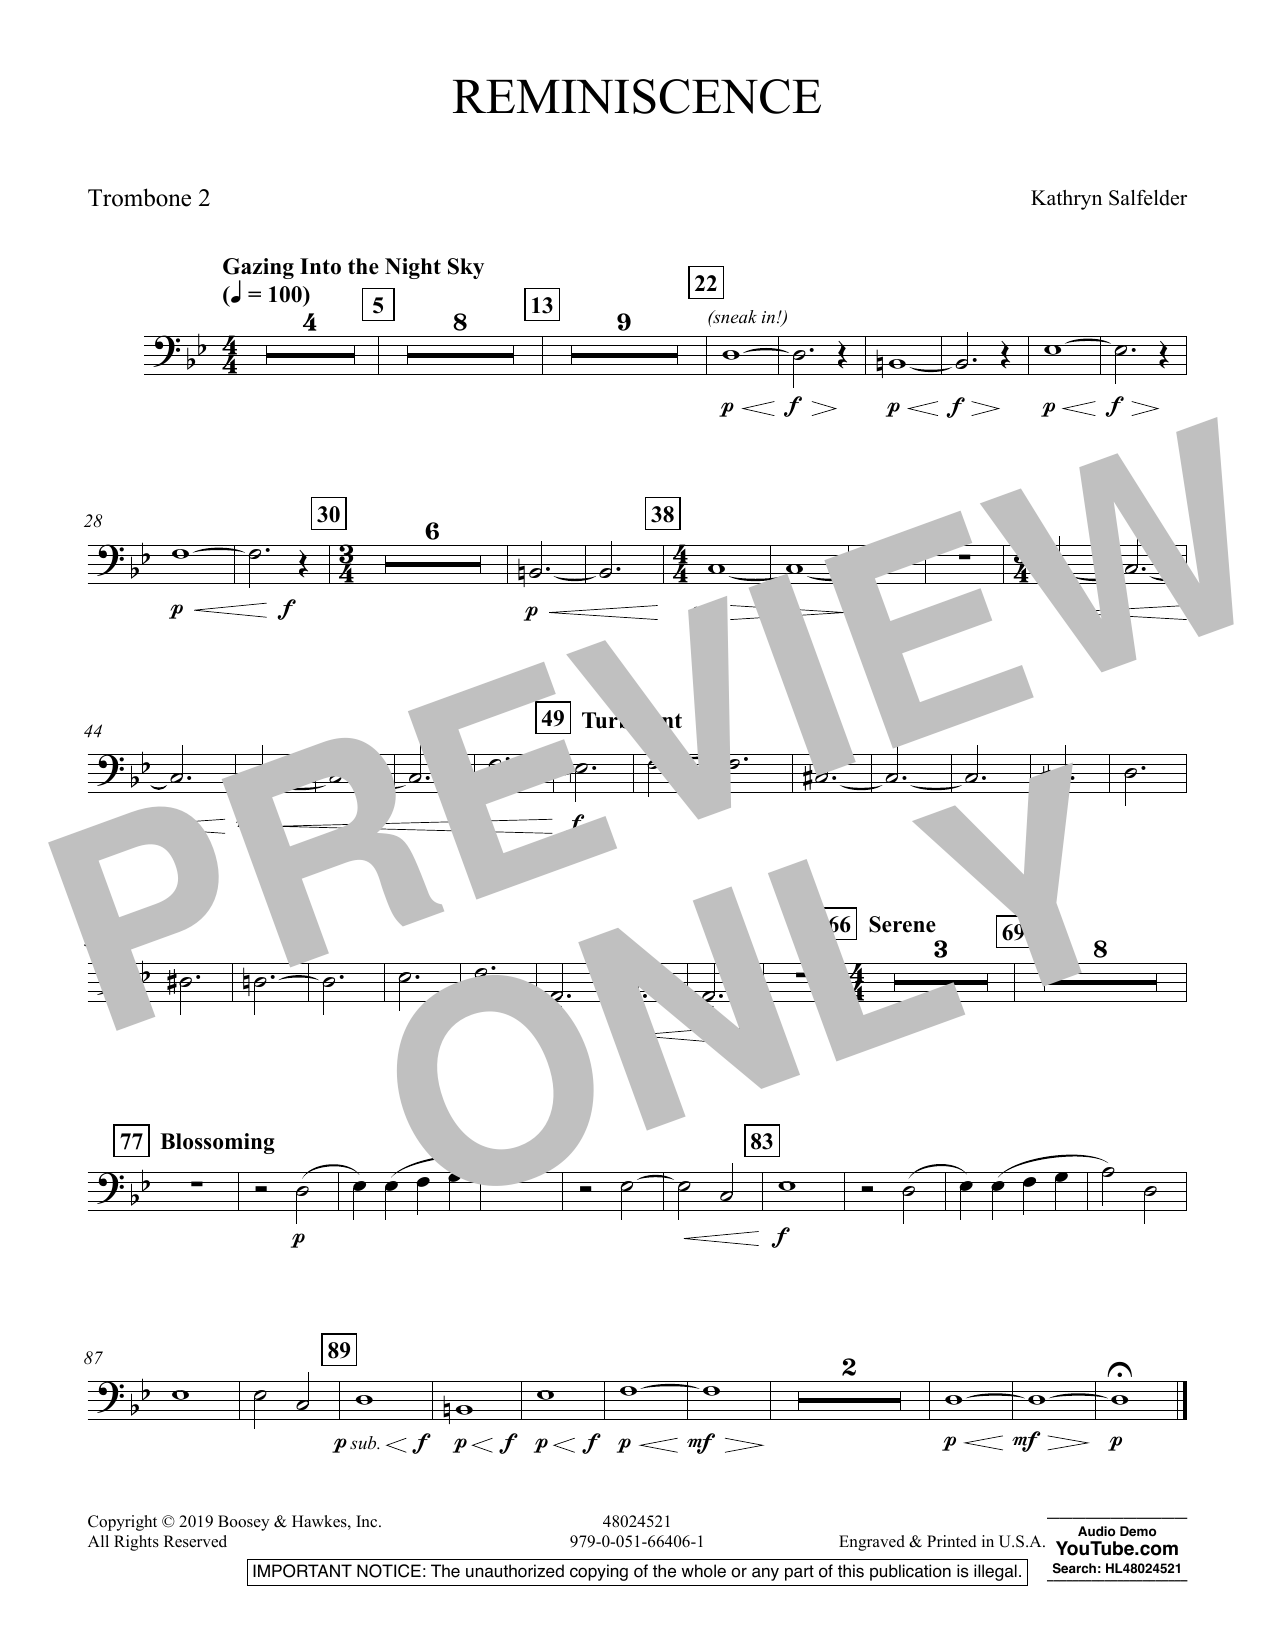 Kathryn Salfelder Reminiscence - Trombone 2 sheet music preview music notes and score for Concert Band including 1 page(s)